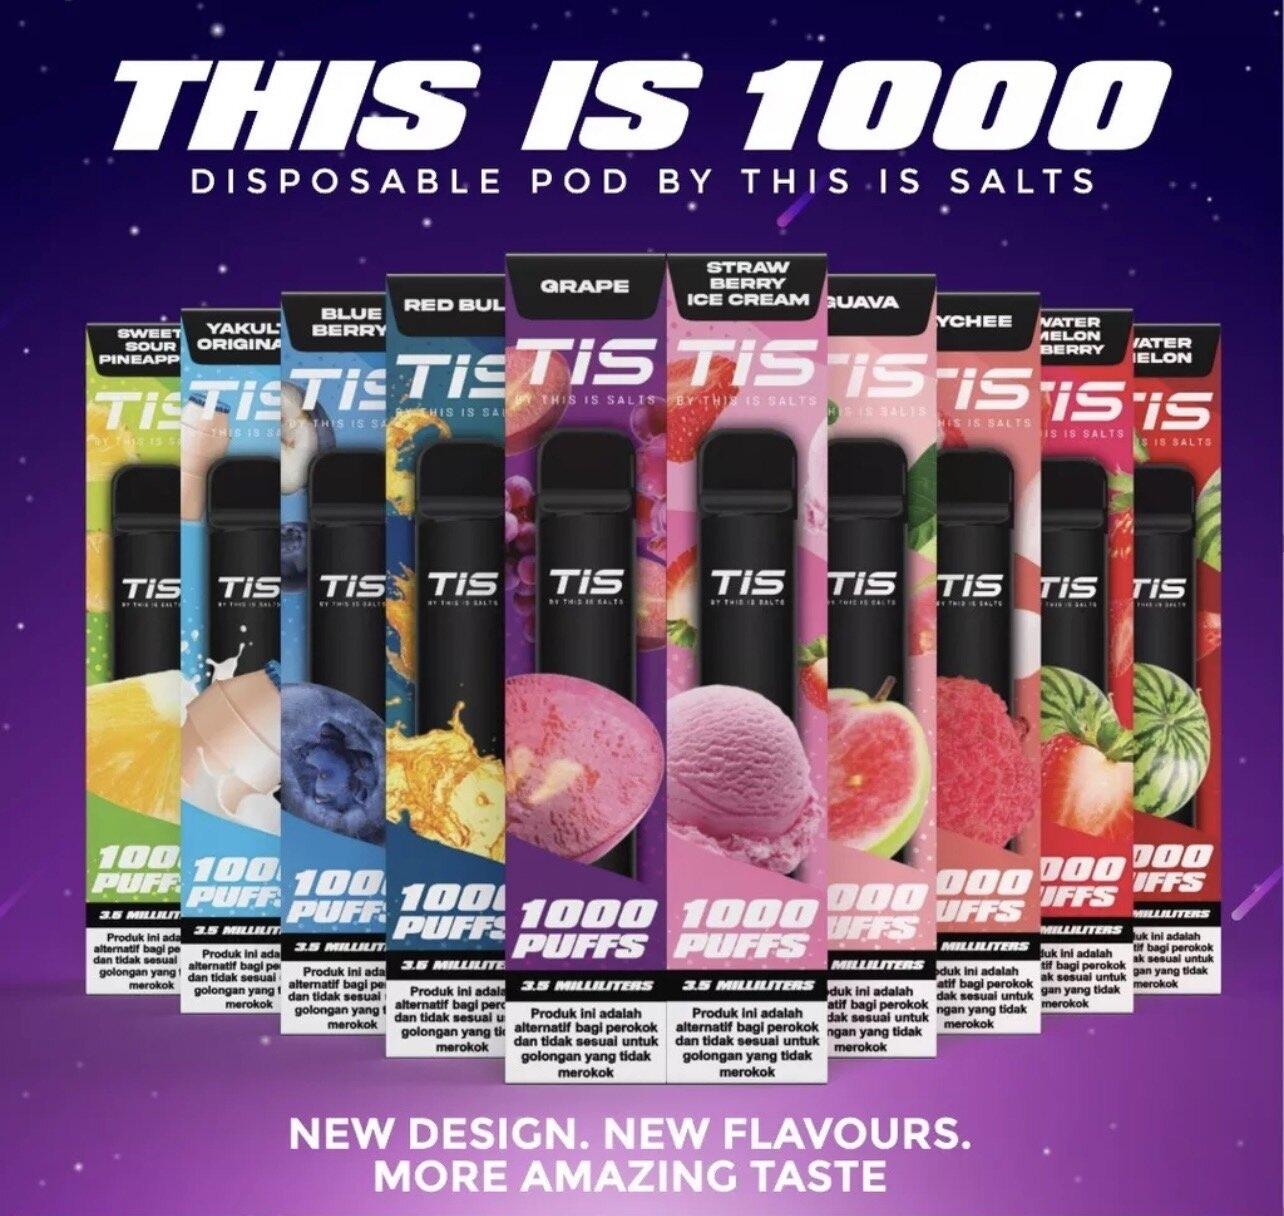 TIS by This is Salts 1500 Puffs